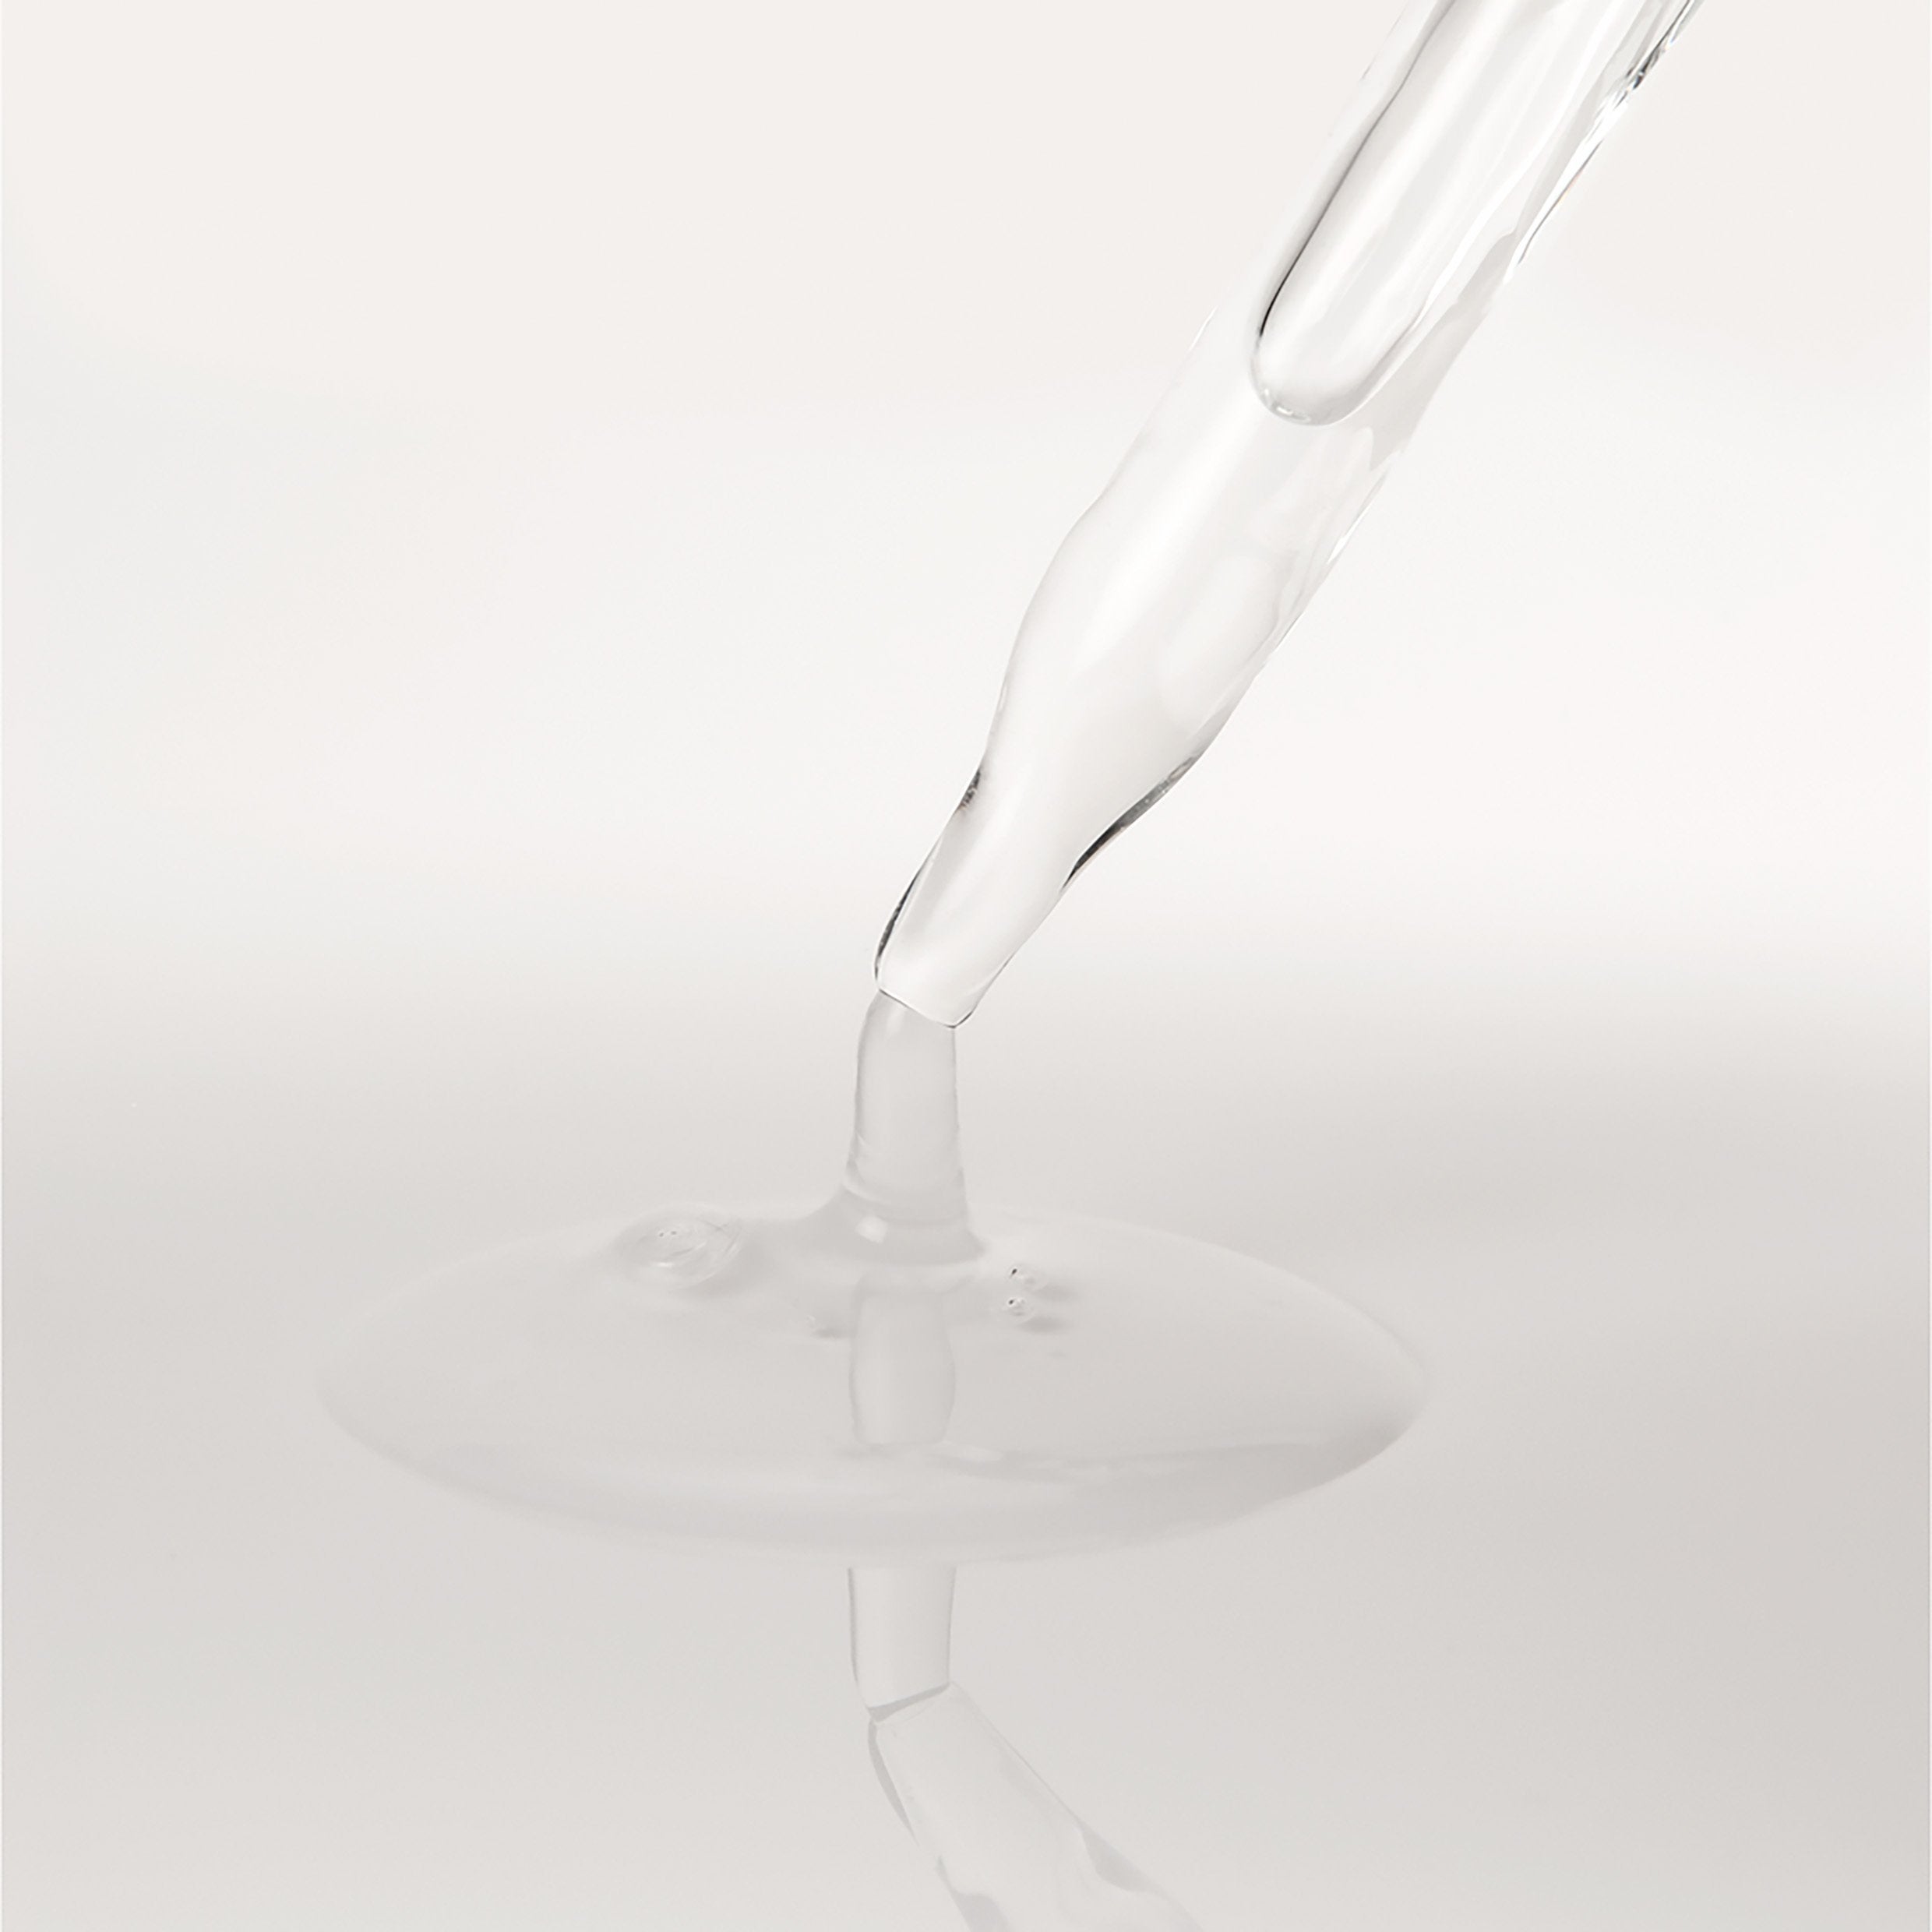 AGELESS Total Pure Hyaluronic 6 Filler